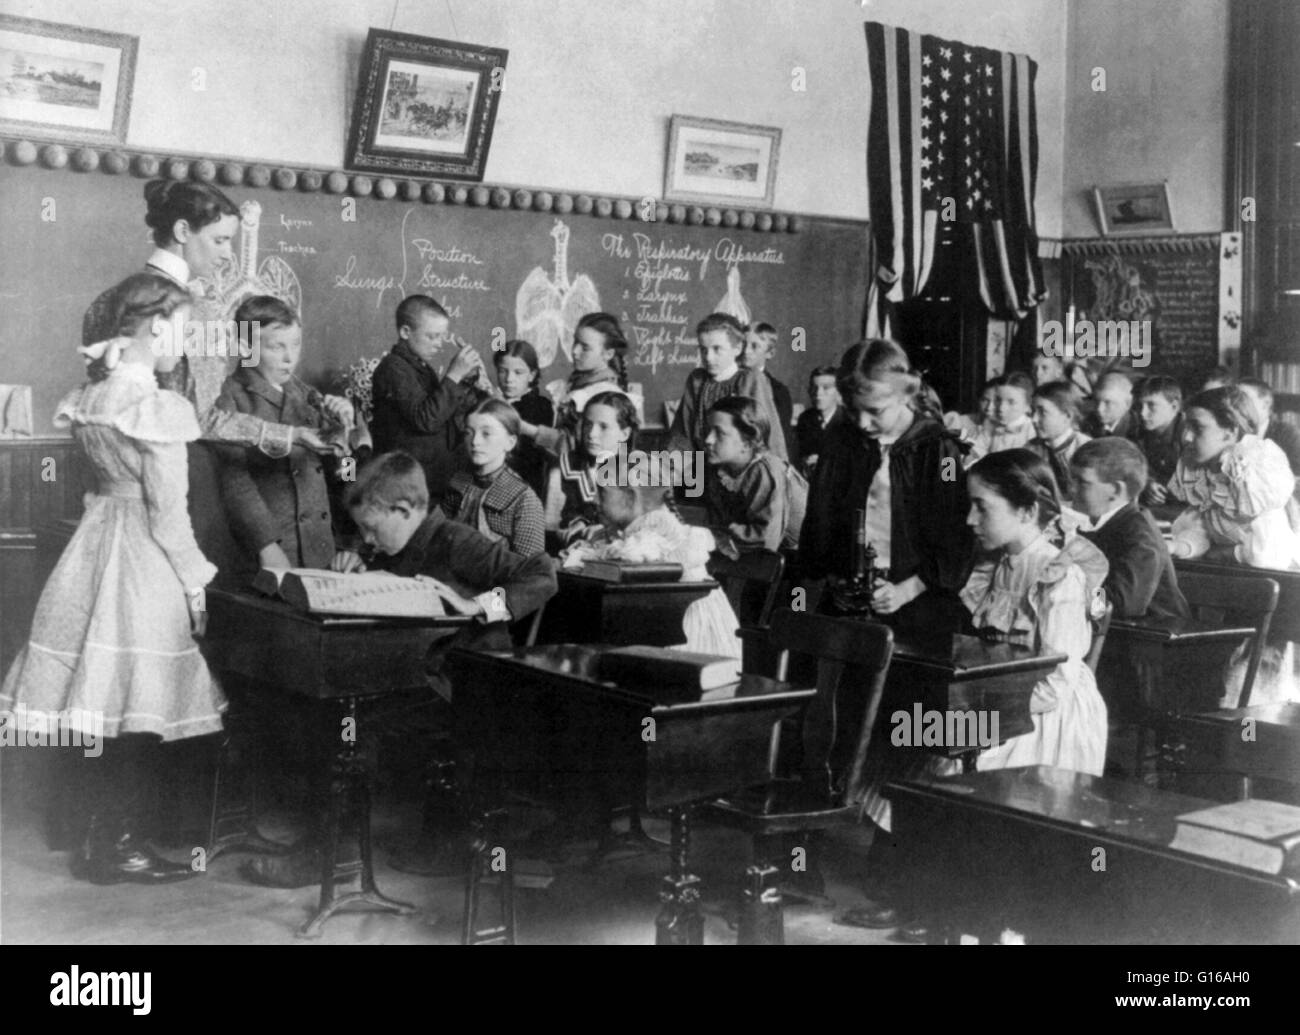 Biology class, Washington, D.C. public school, 1899. No school name given on caption card. An elementary school or primary school is an institution where children receive the first stage of academic learning known as elementary or primary education. Photo Stock Photo